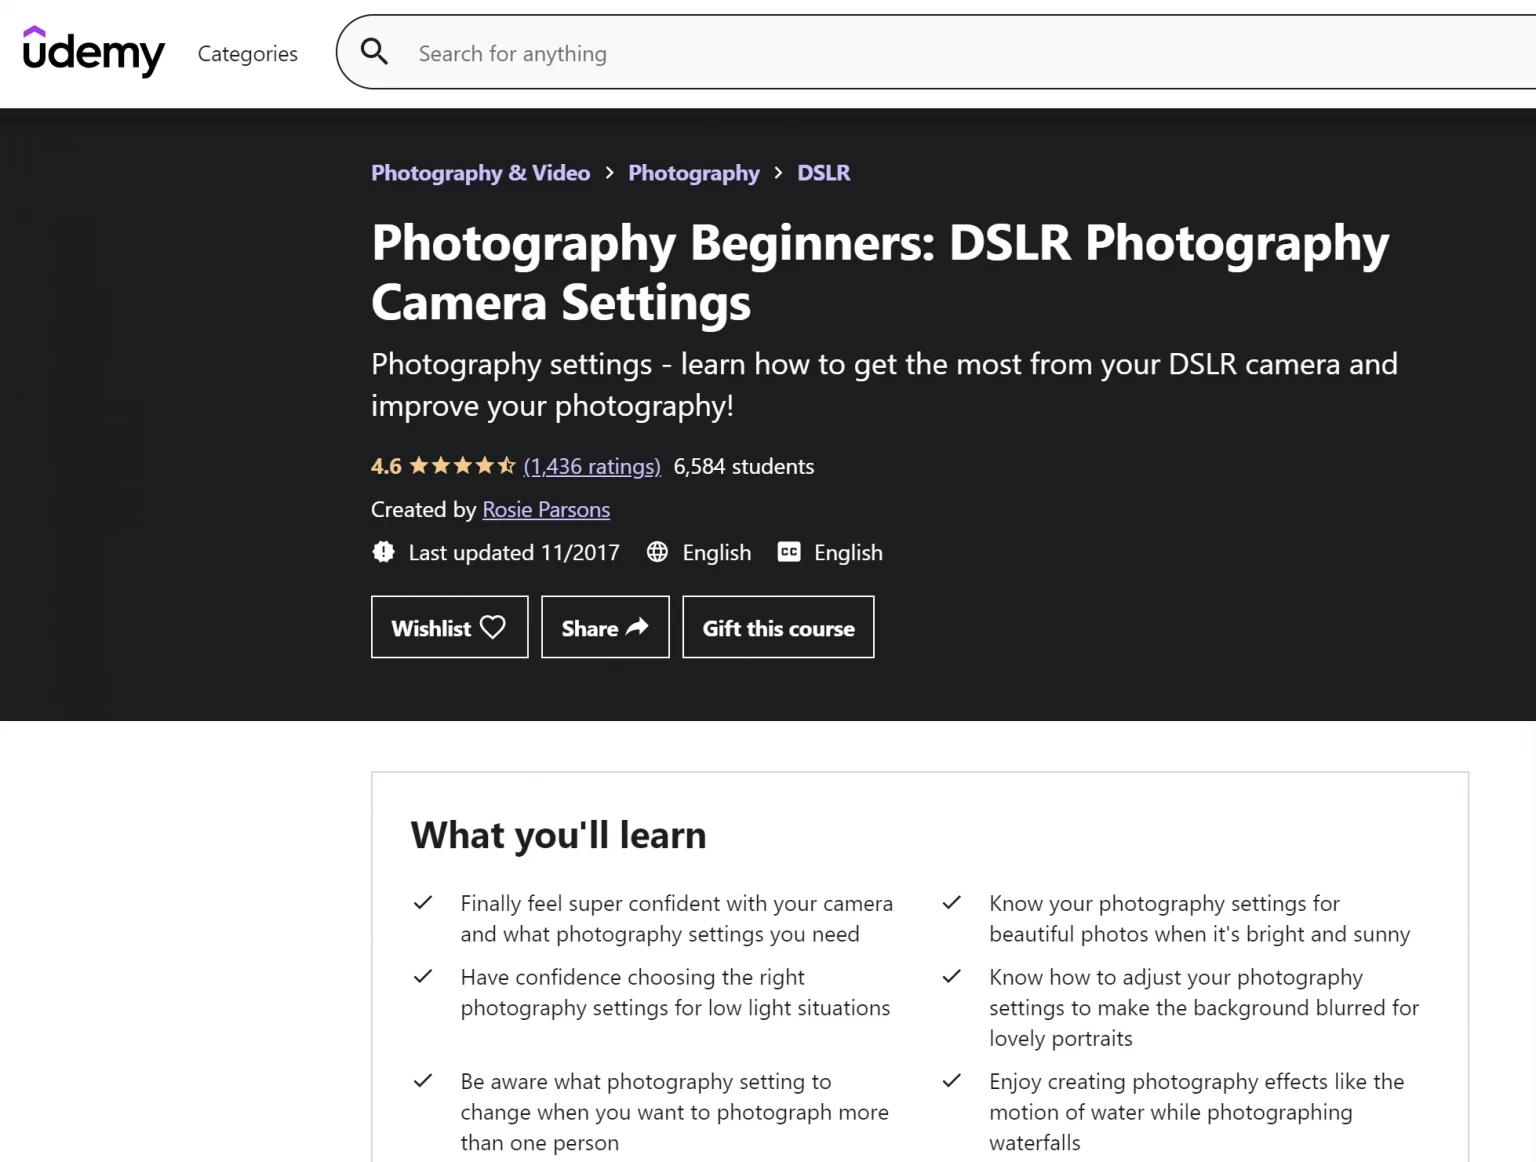 Udemy: Photography Beginners, DSLR Photography Camera Settings